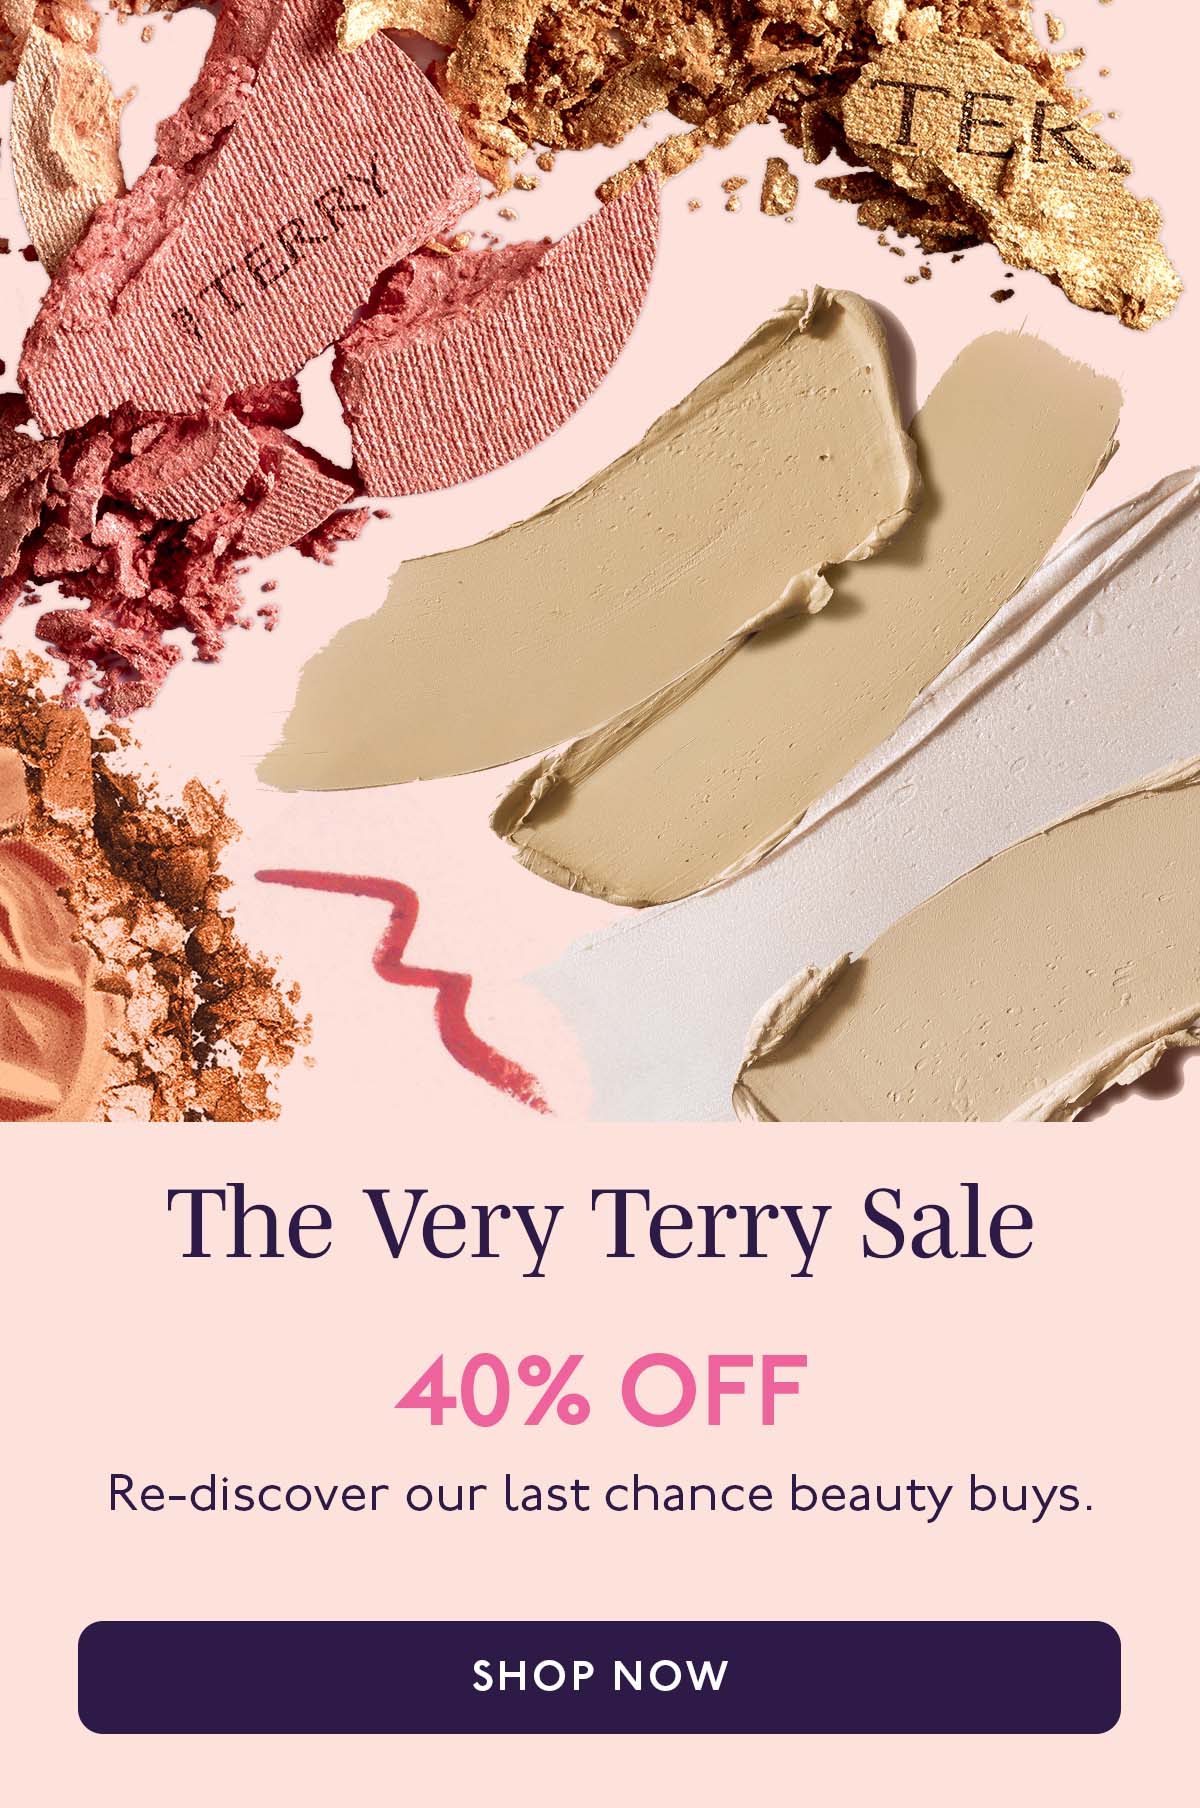 THE VERY TERRY SALE